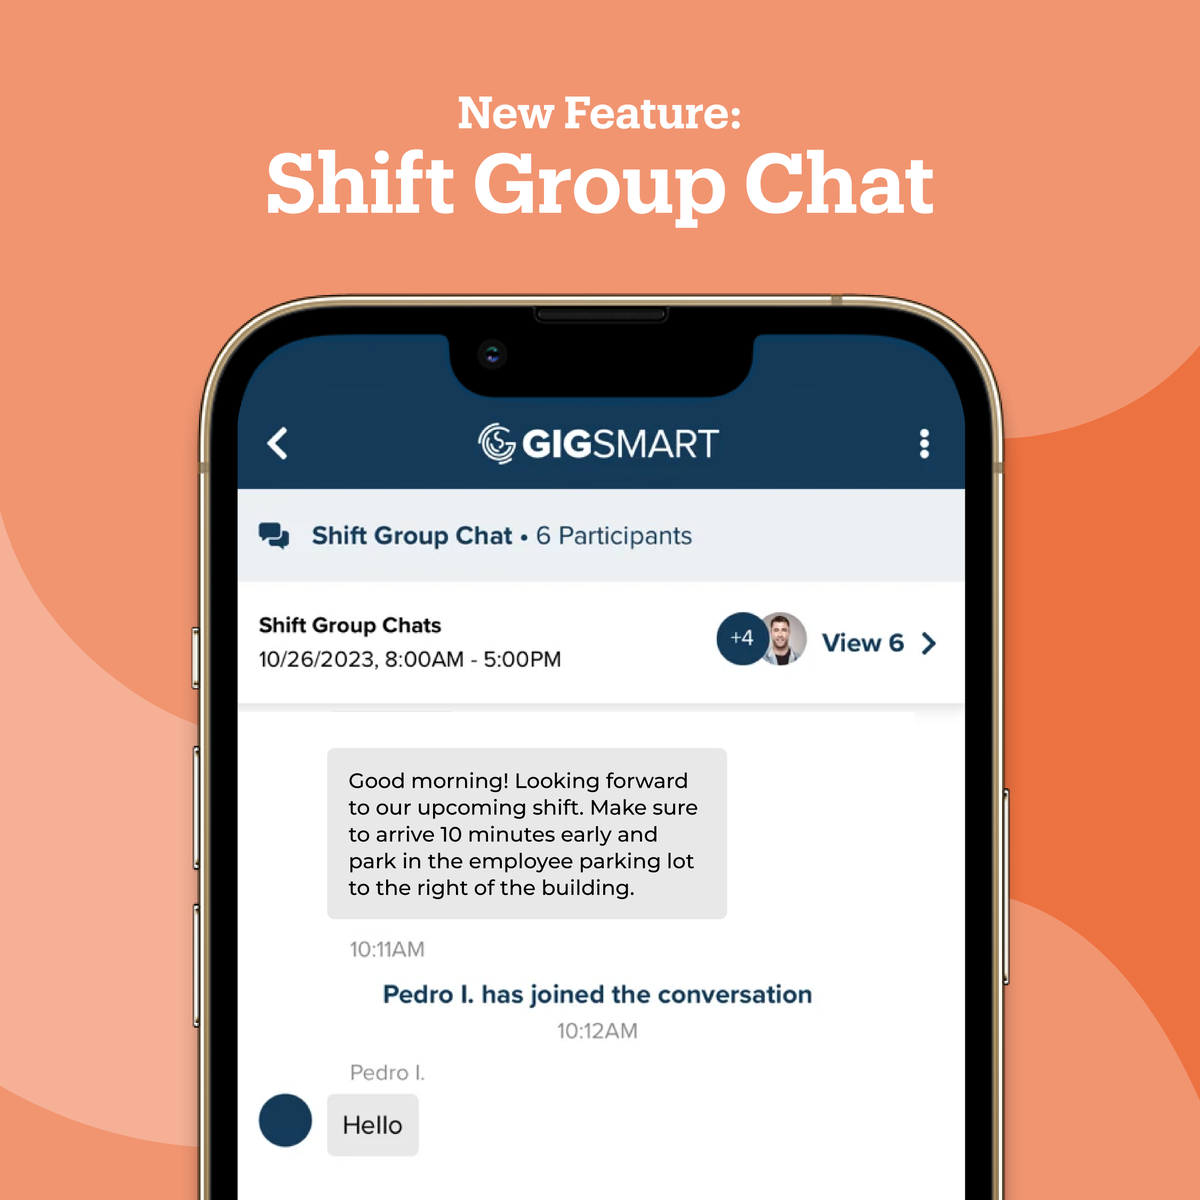 New Feature Alert! Workers can now utilize group chats to communicate with other workers hired and the business you’ll be working for in one place, streamlining communication for everyone.